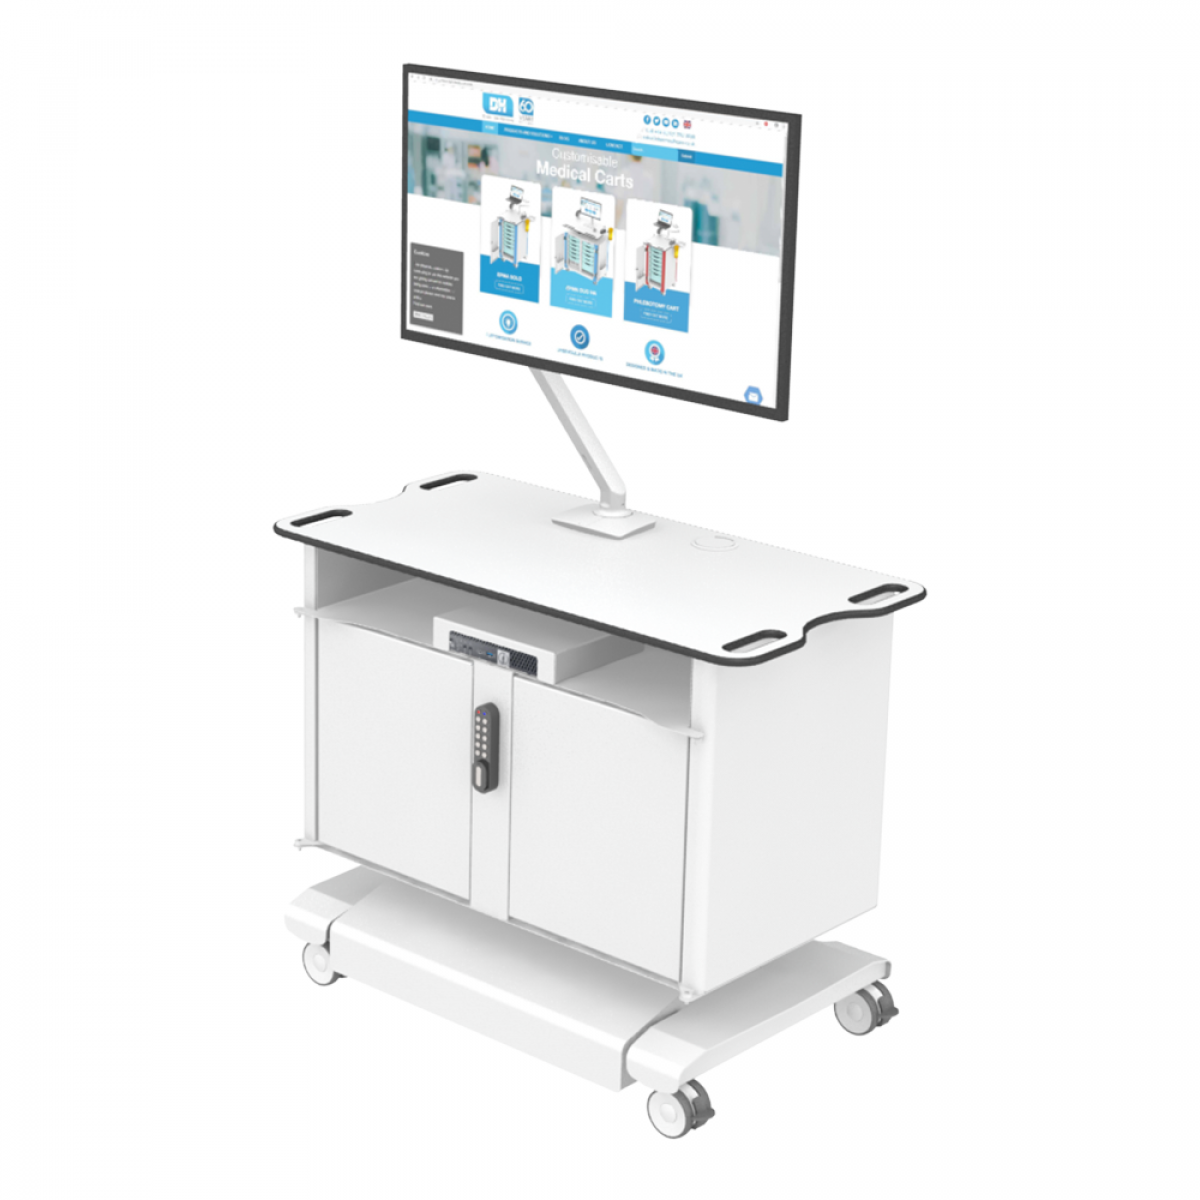 Dalen Healthcare - MediCab Duo - with height adjustable cabinet